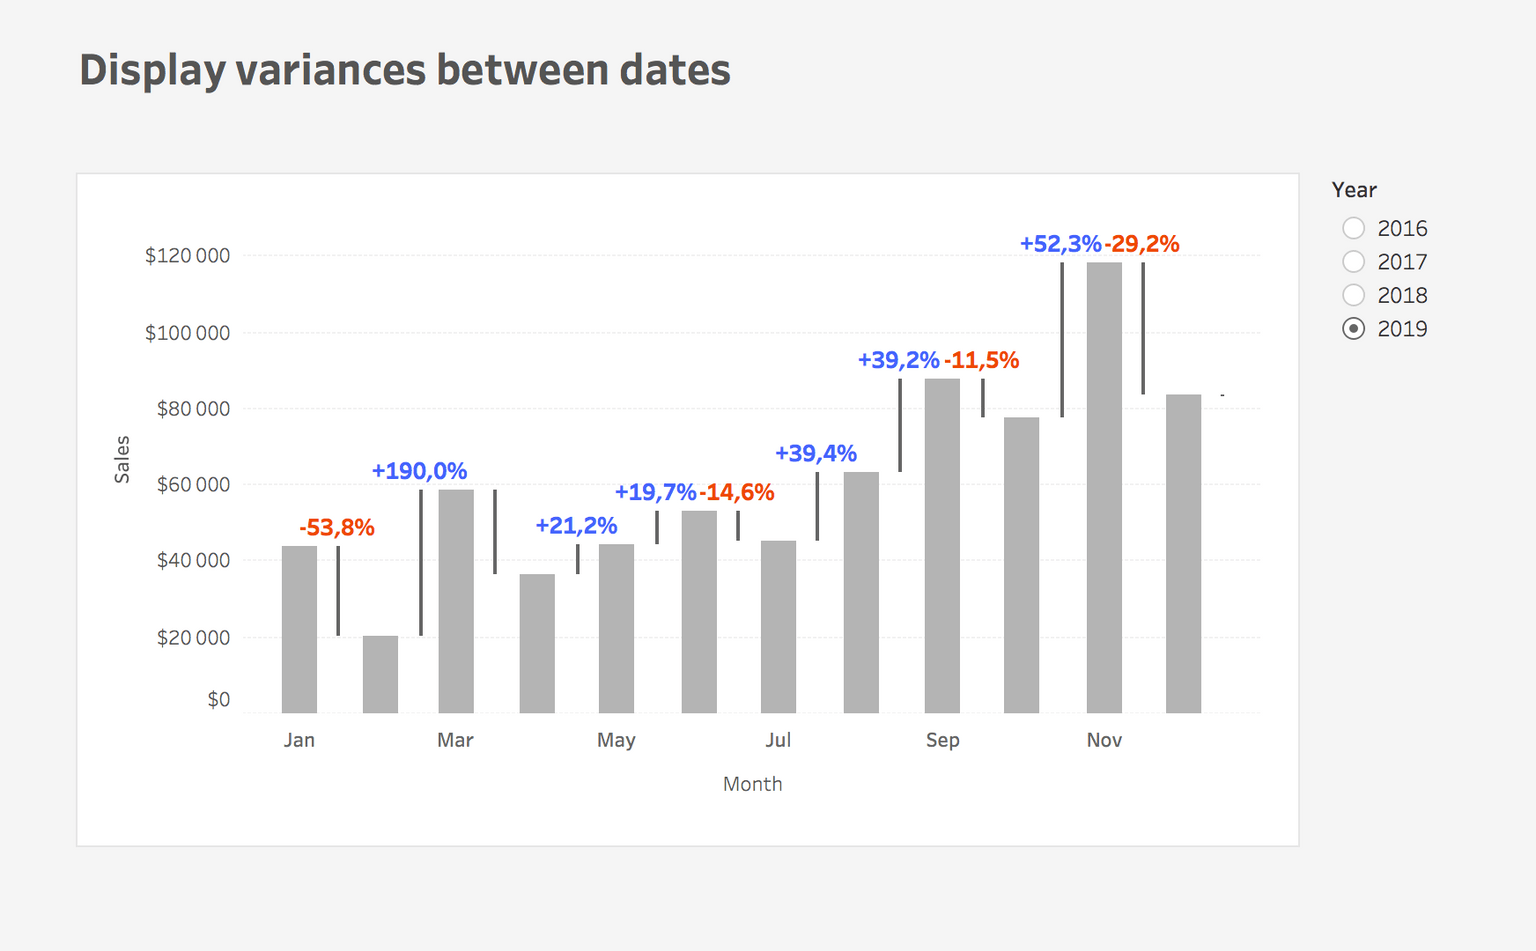 Calculating the variance between dates - continued